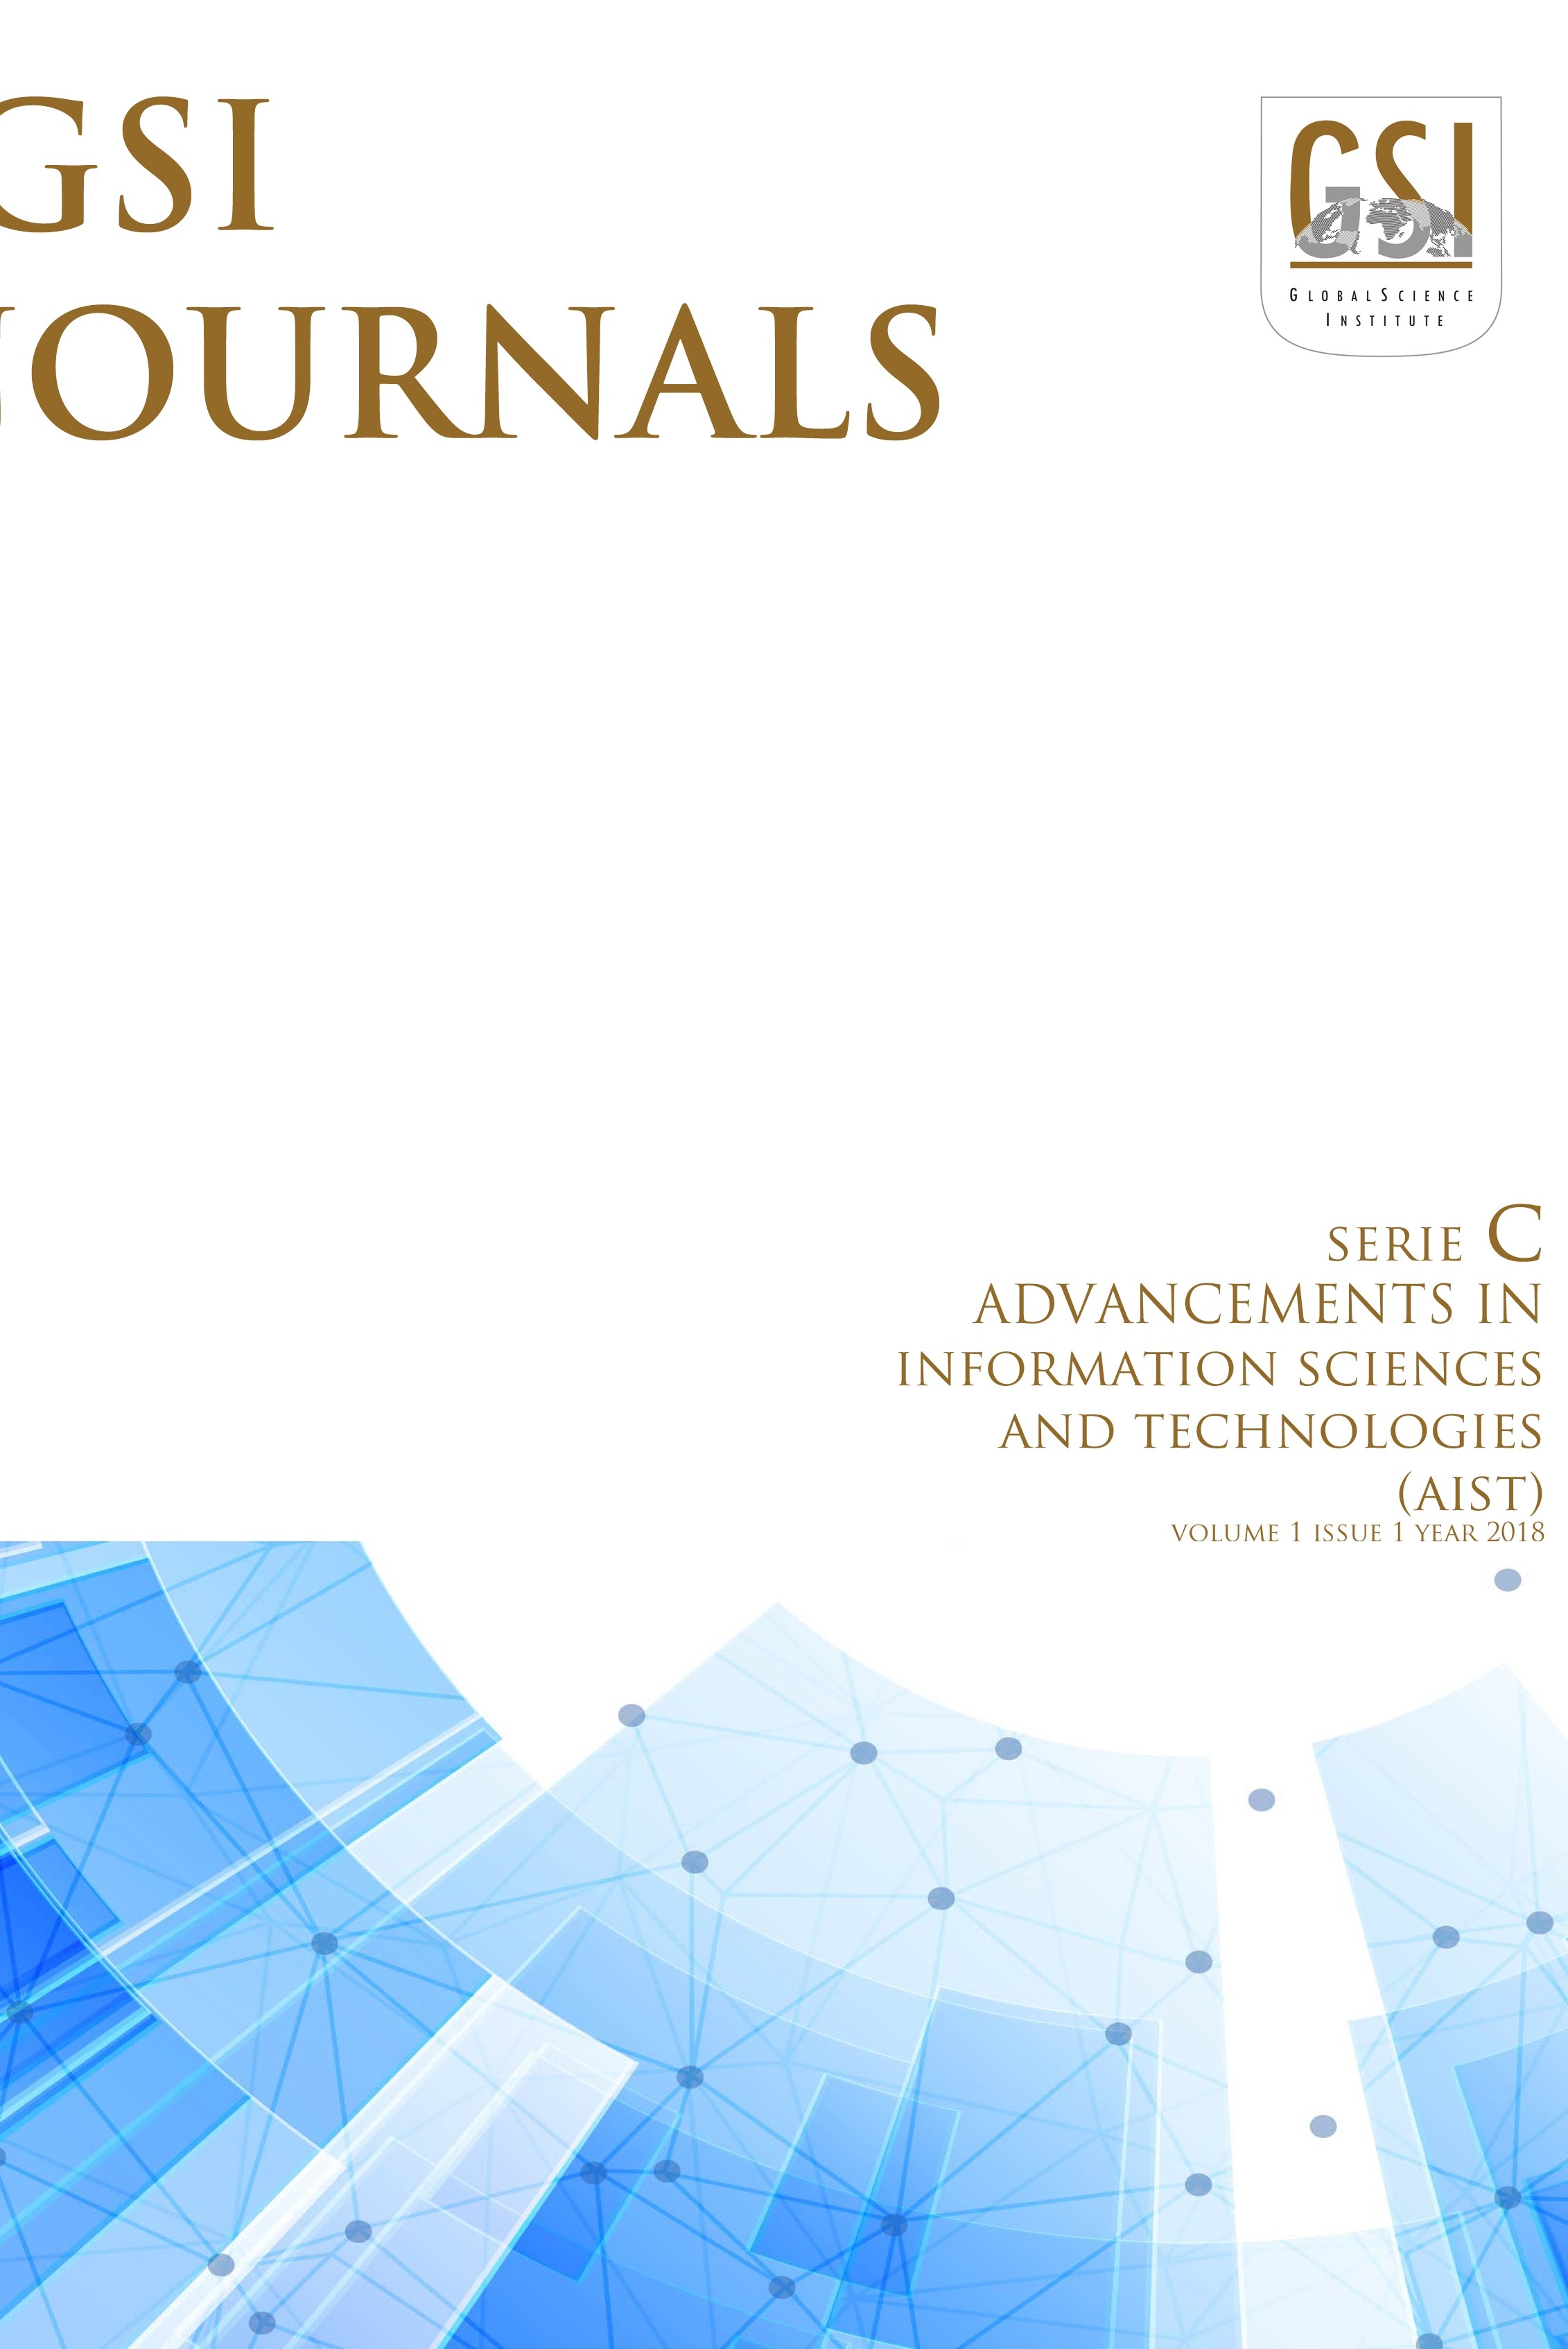 GSI Journals Serie C: Advancements in Information Sciences and Technologies